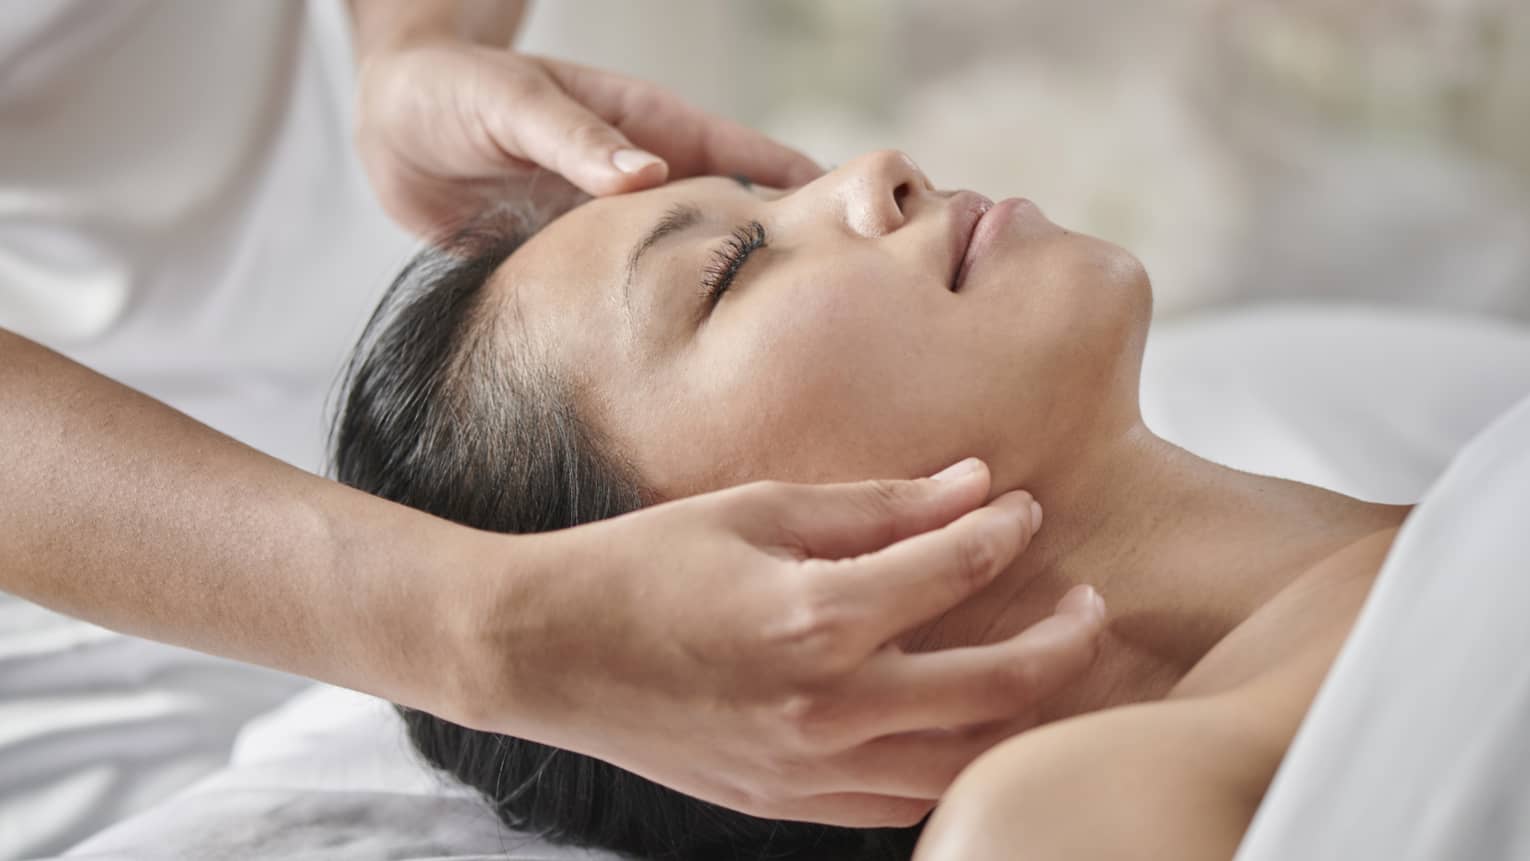 Masseuse massages woman's face as she lies face up on table under white sheet